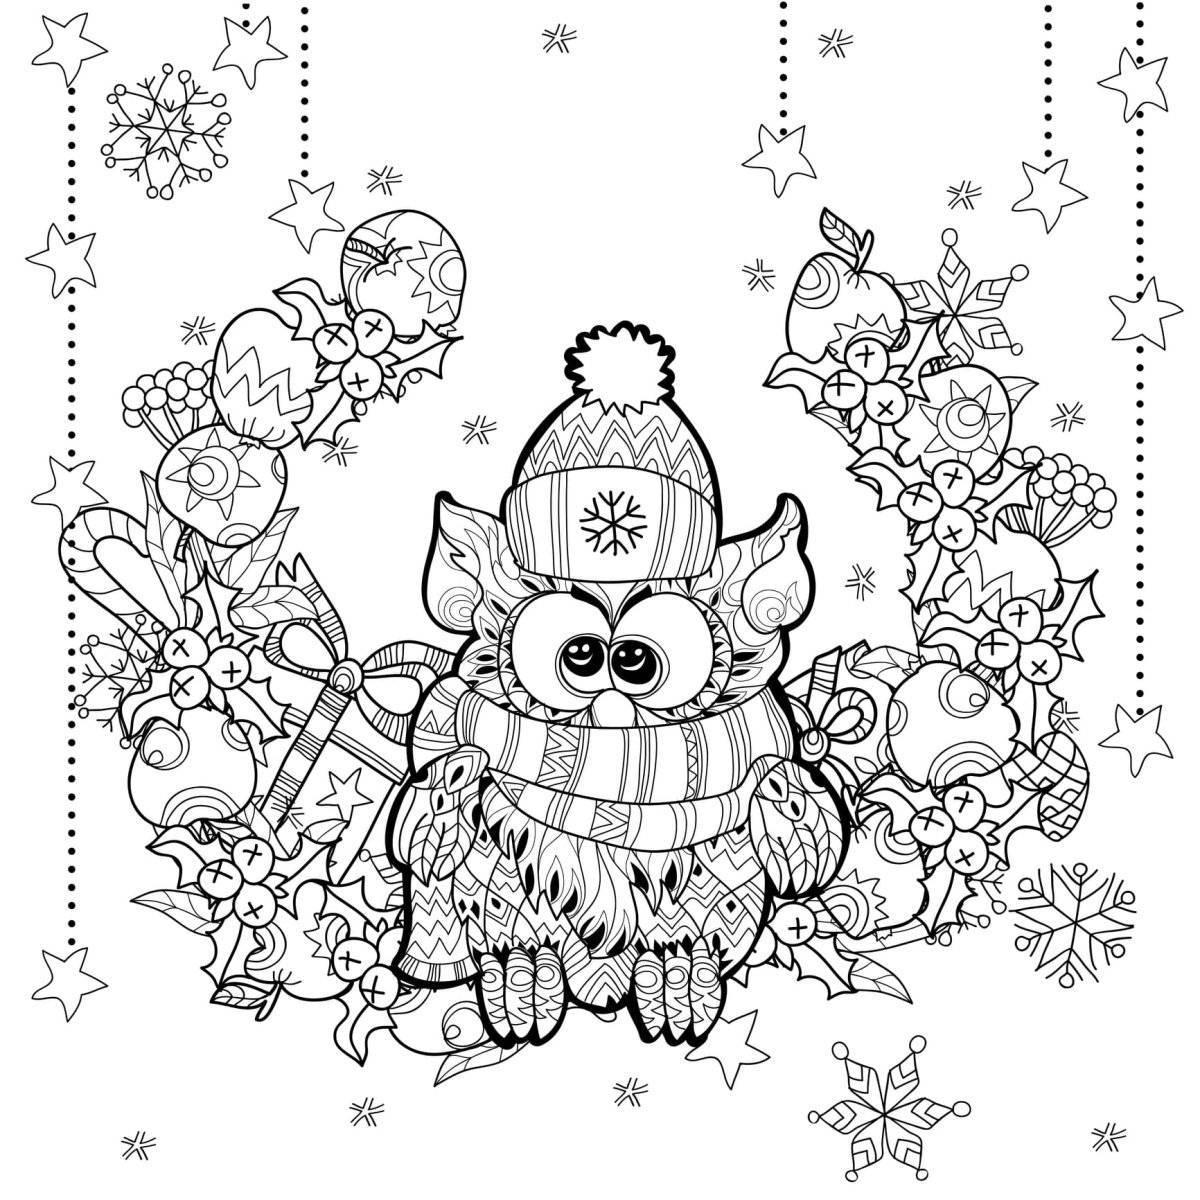 Merry Christmas complex coloring book